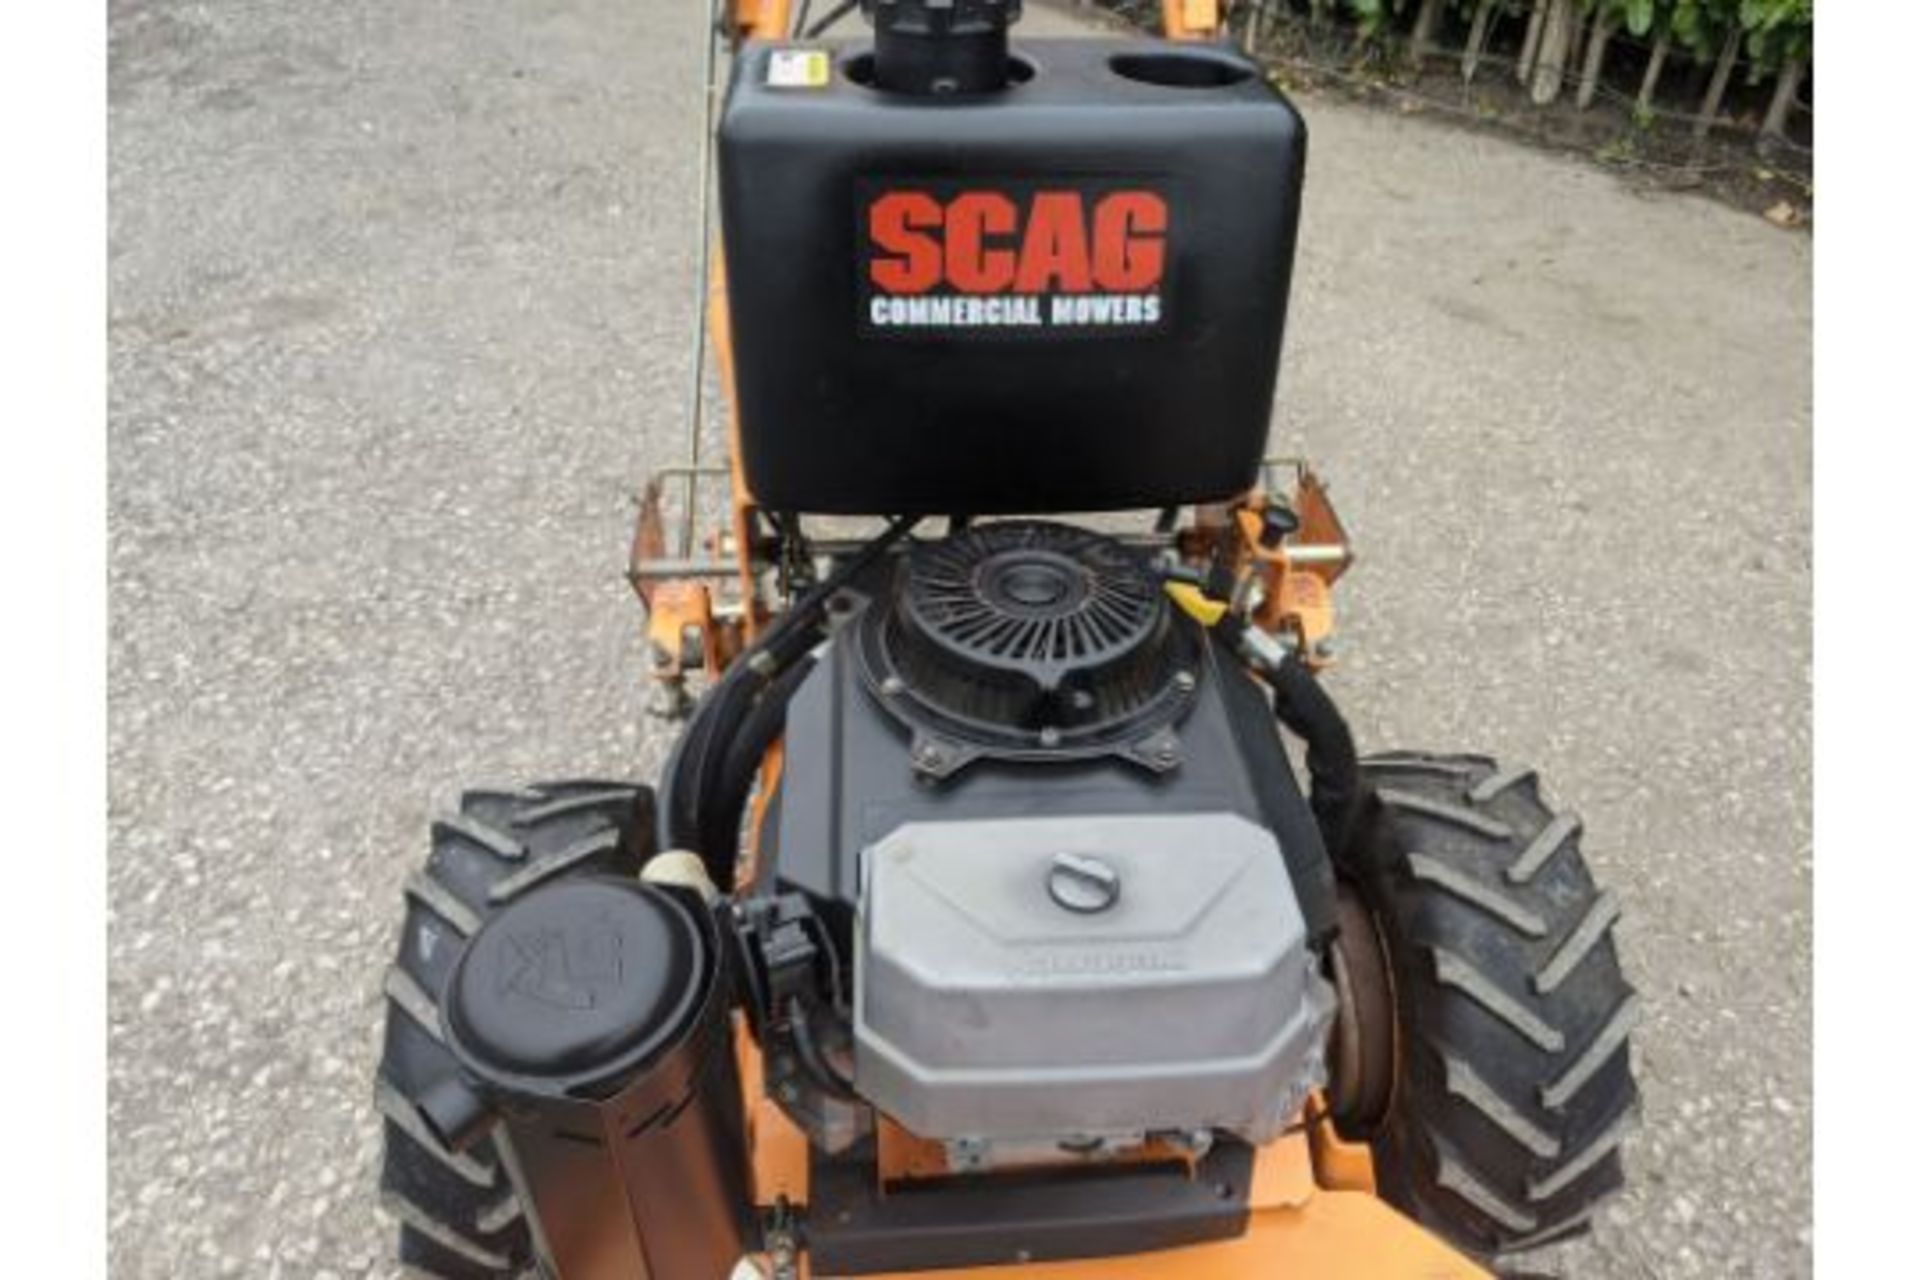 2008 Scag SWZ36A-16KAI 36" Commercial Walk Behind Zero Turn Rotary Mower - Image 6 of 7